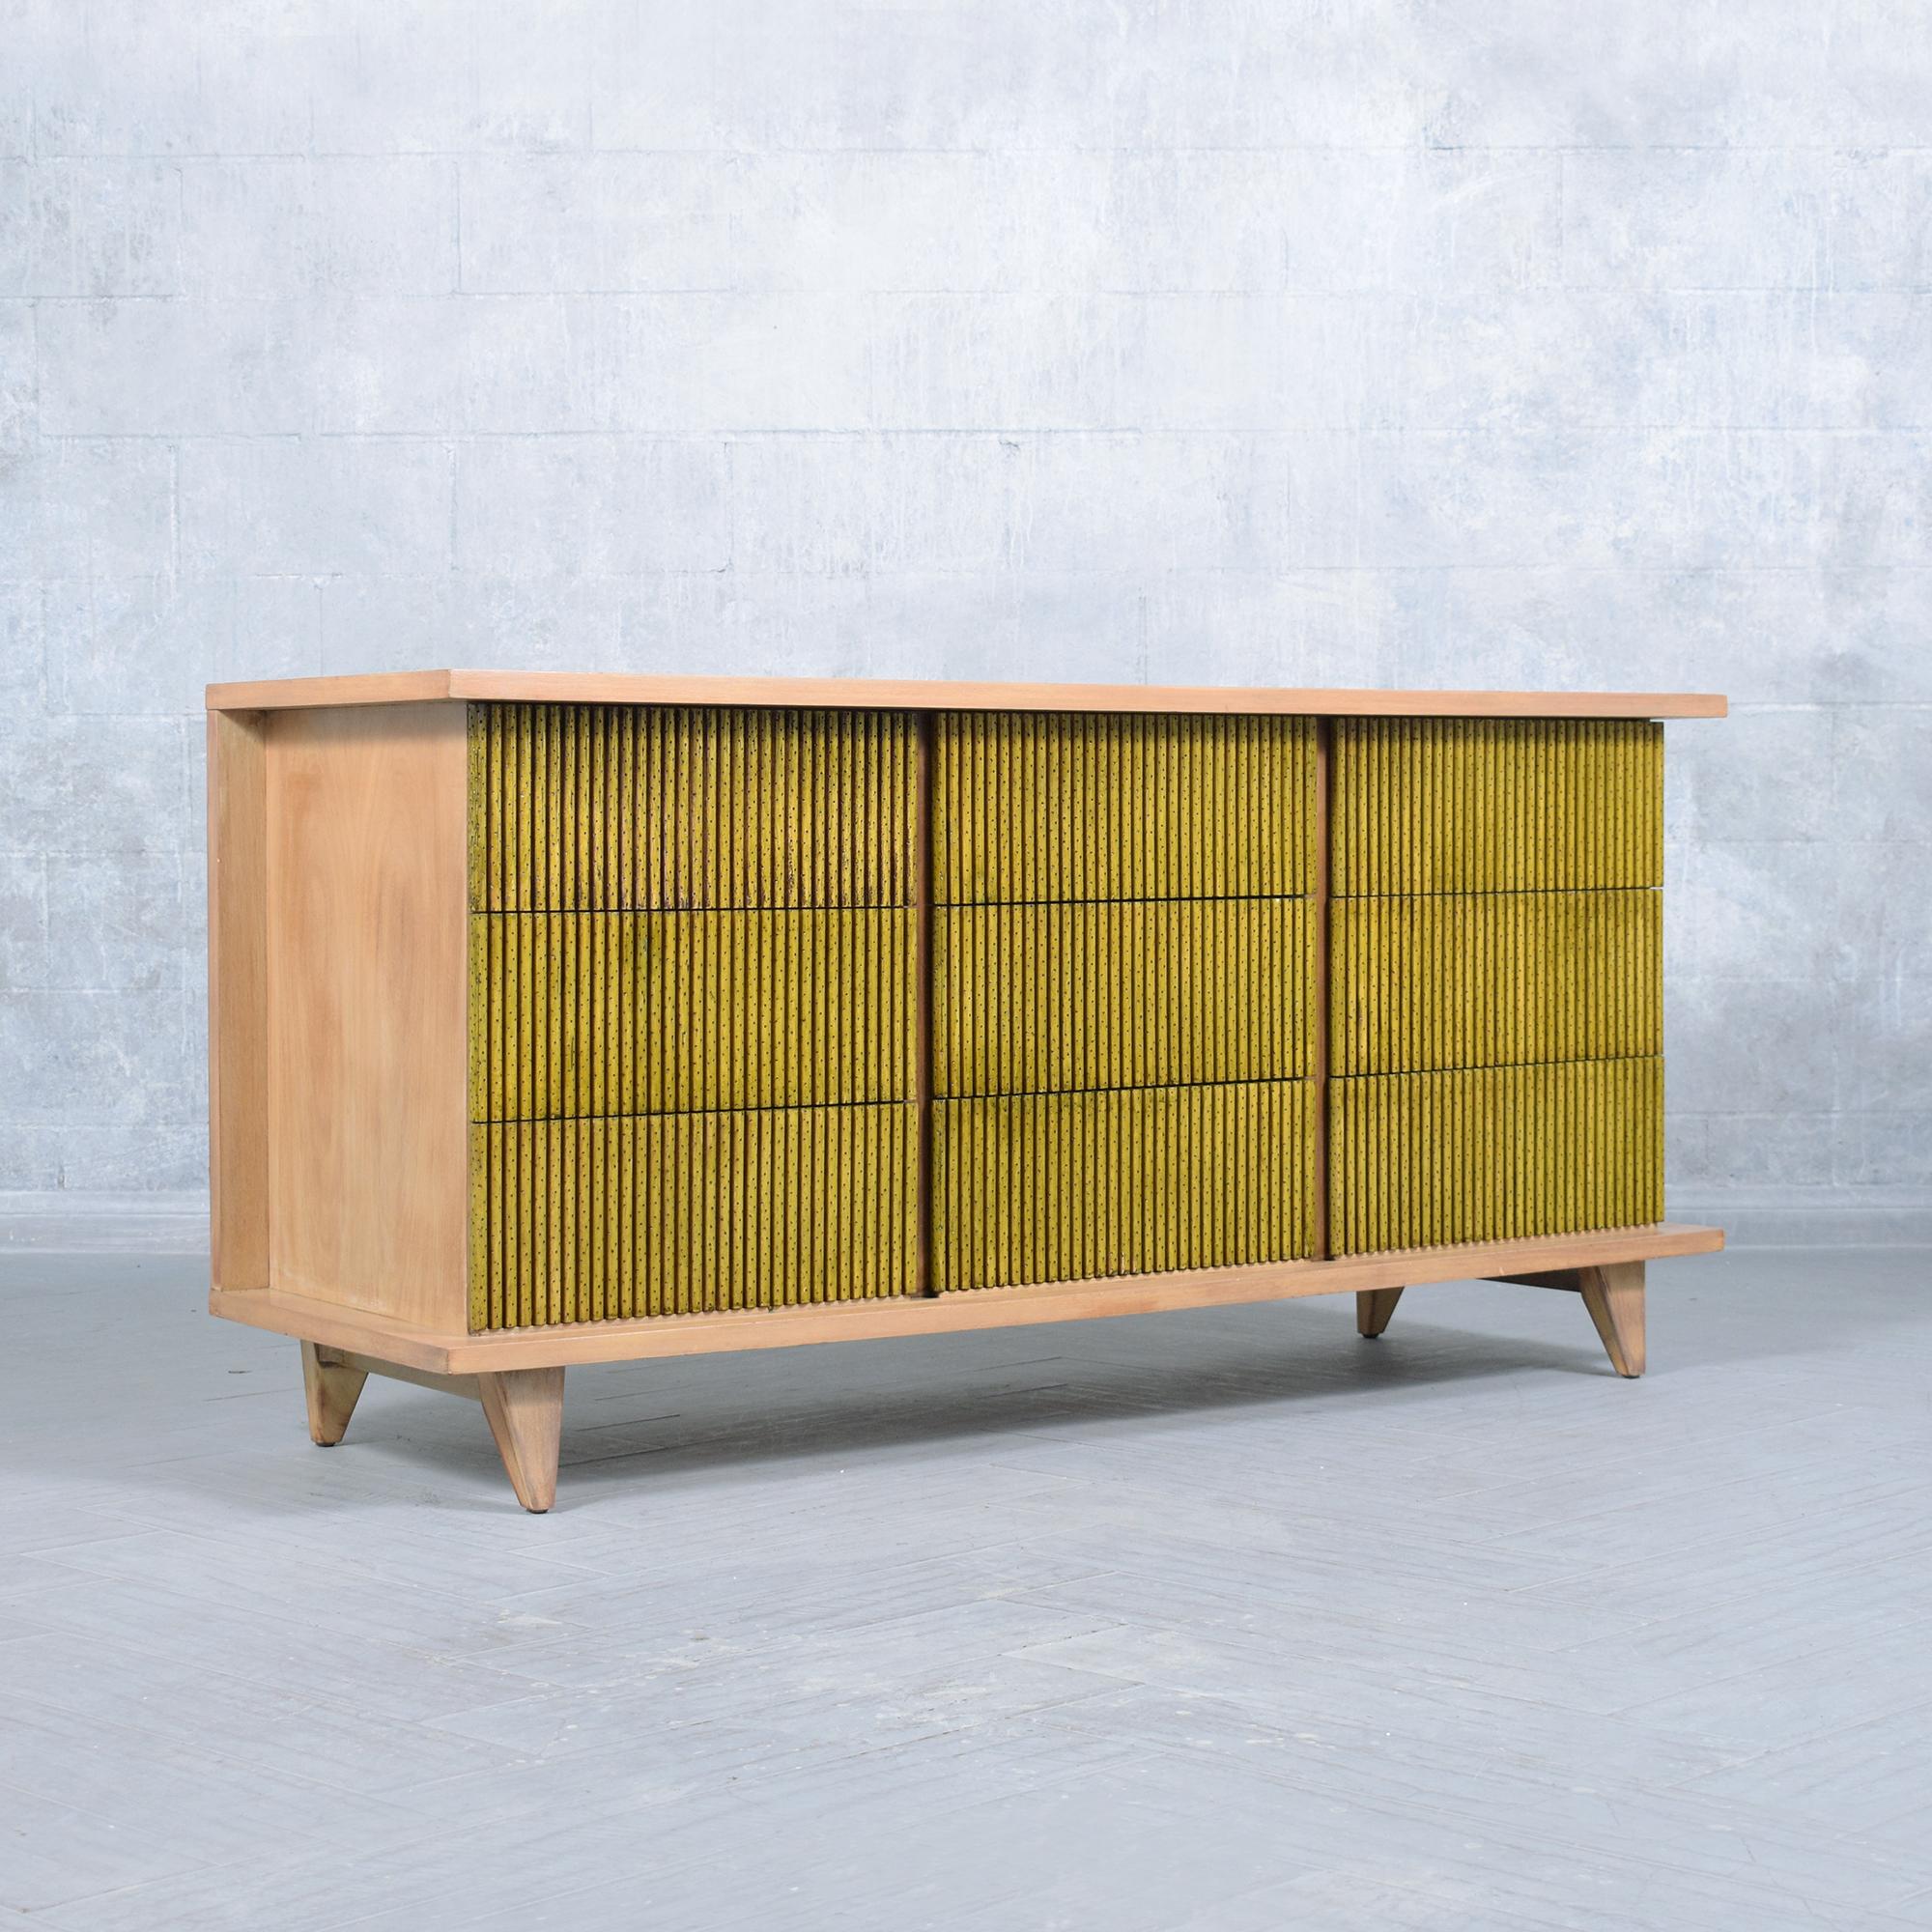 1960s Walnut Mid-Century Organic Modern Chest of Drawers: Handcrafted & Restored For Sale 4